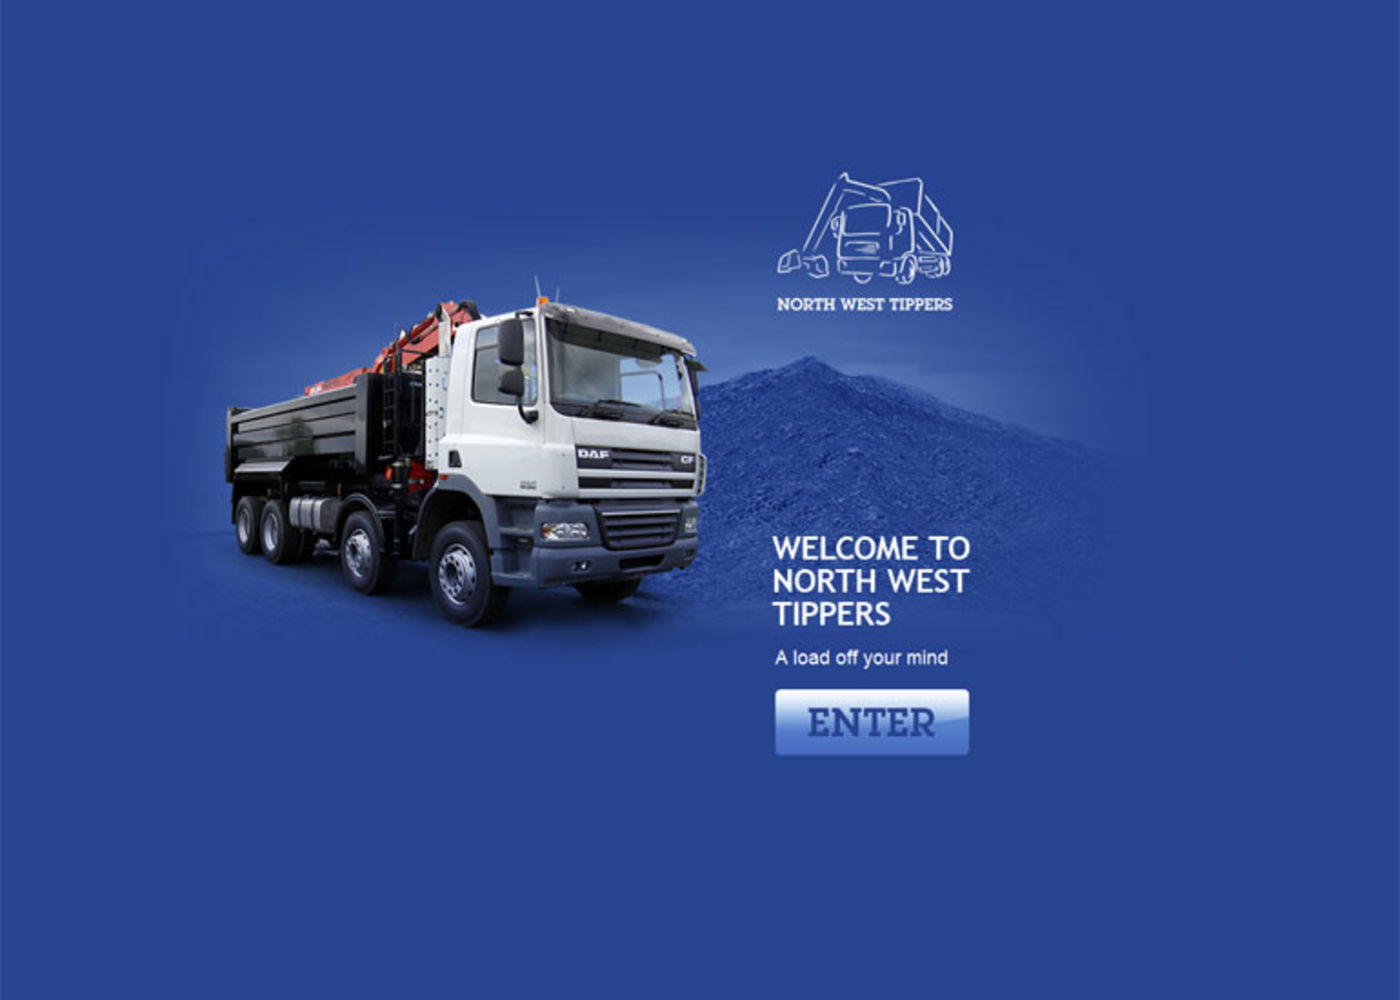 N.W. Tippers Welcome